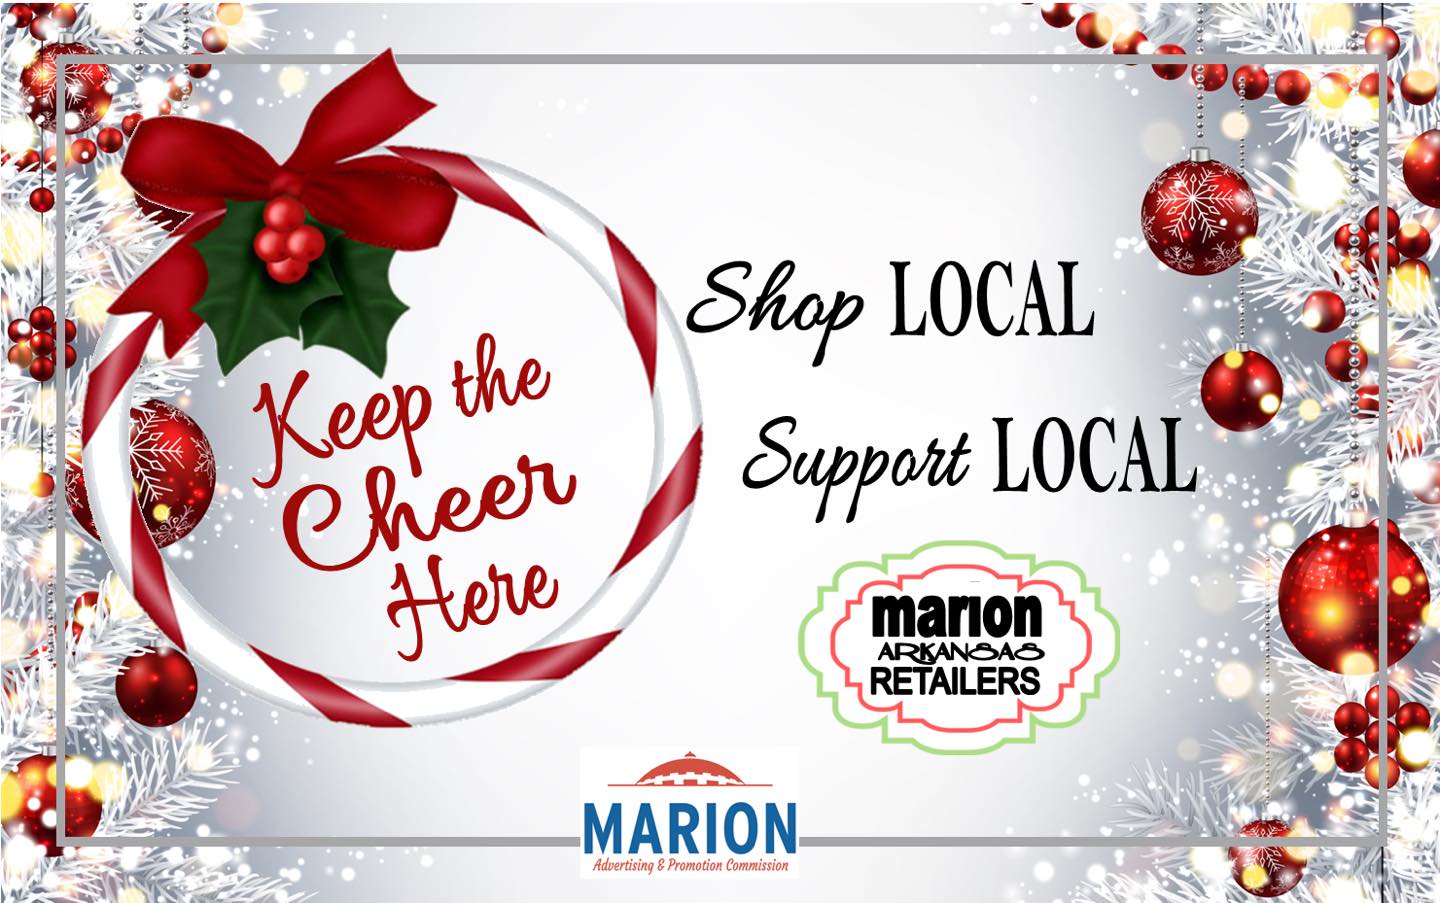 Keep the Cheer Here. Shop Local. Support Local. Marion Arkansas Retailers